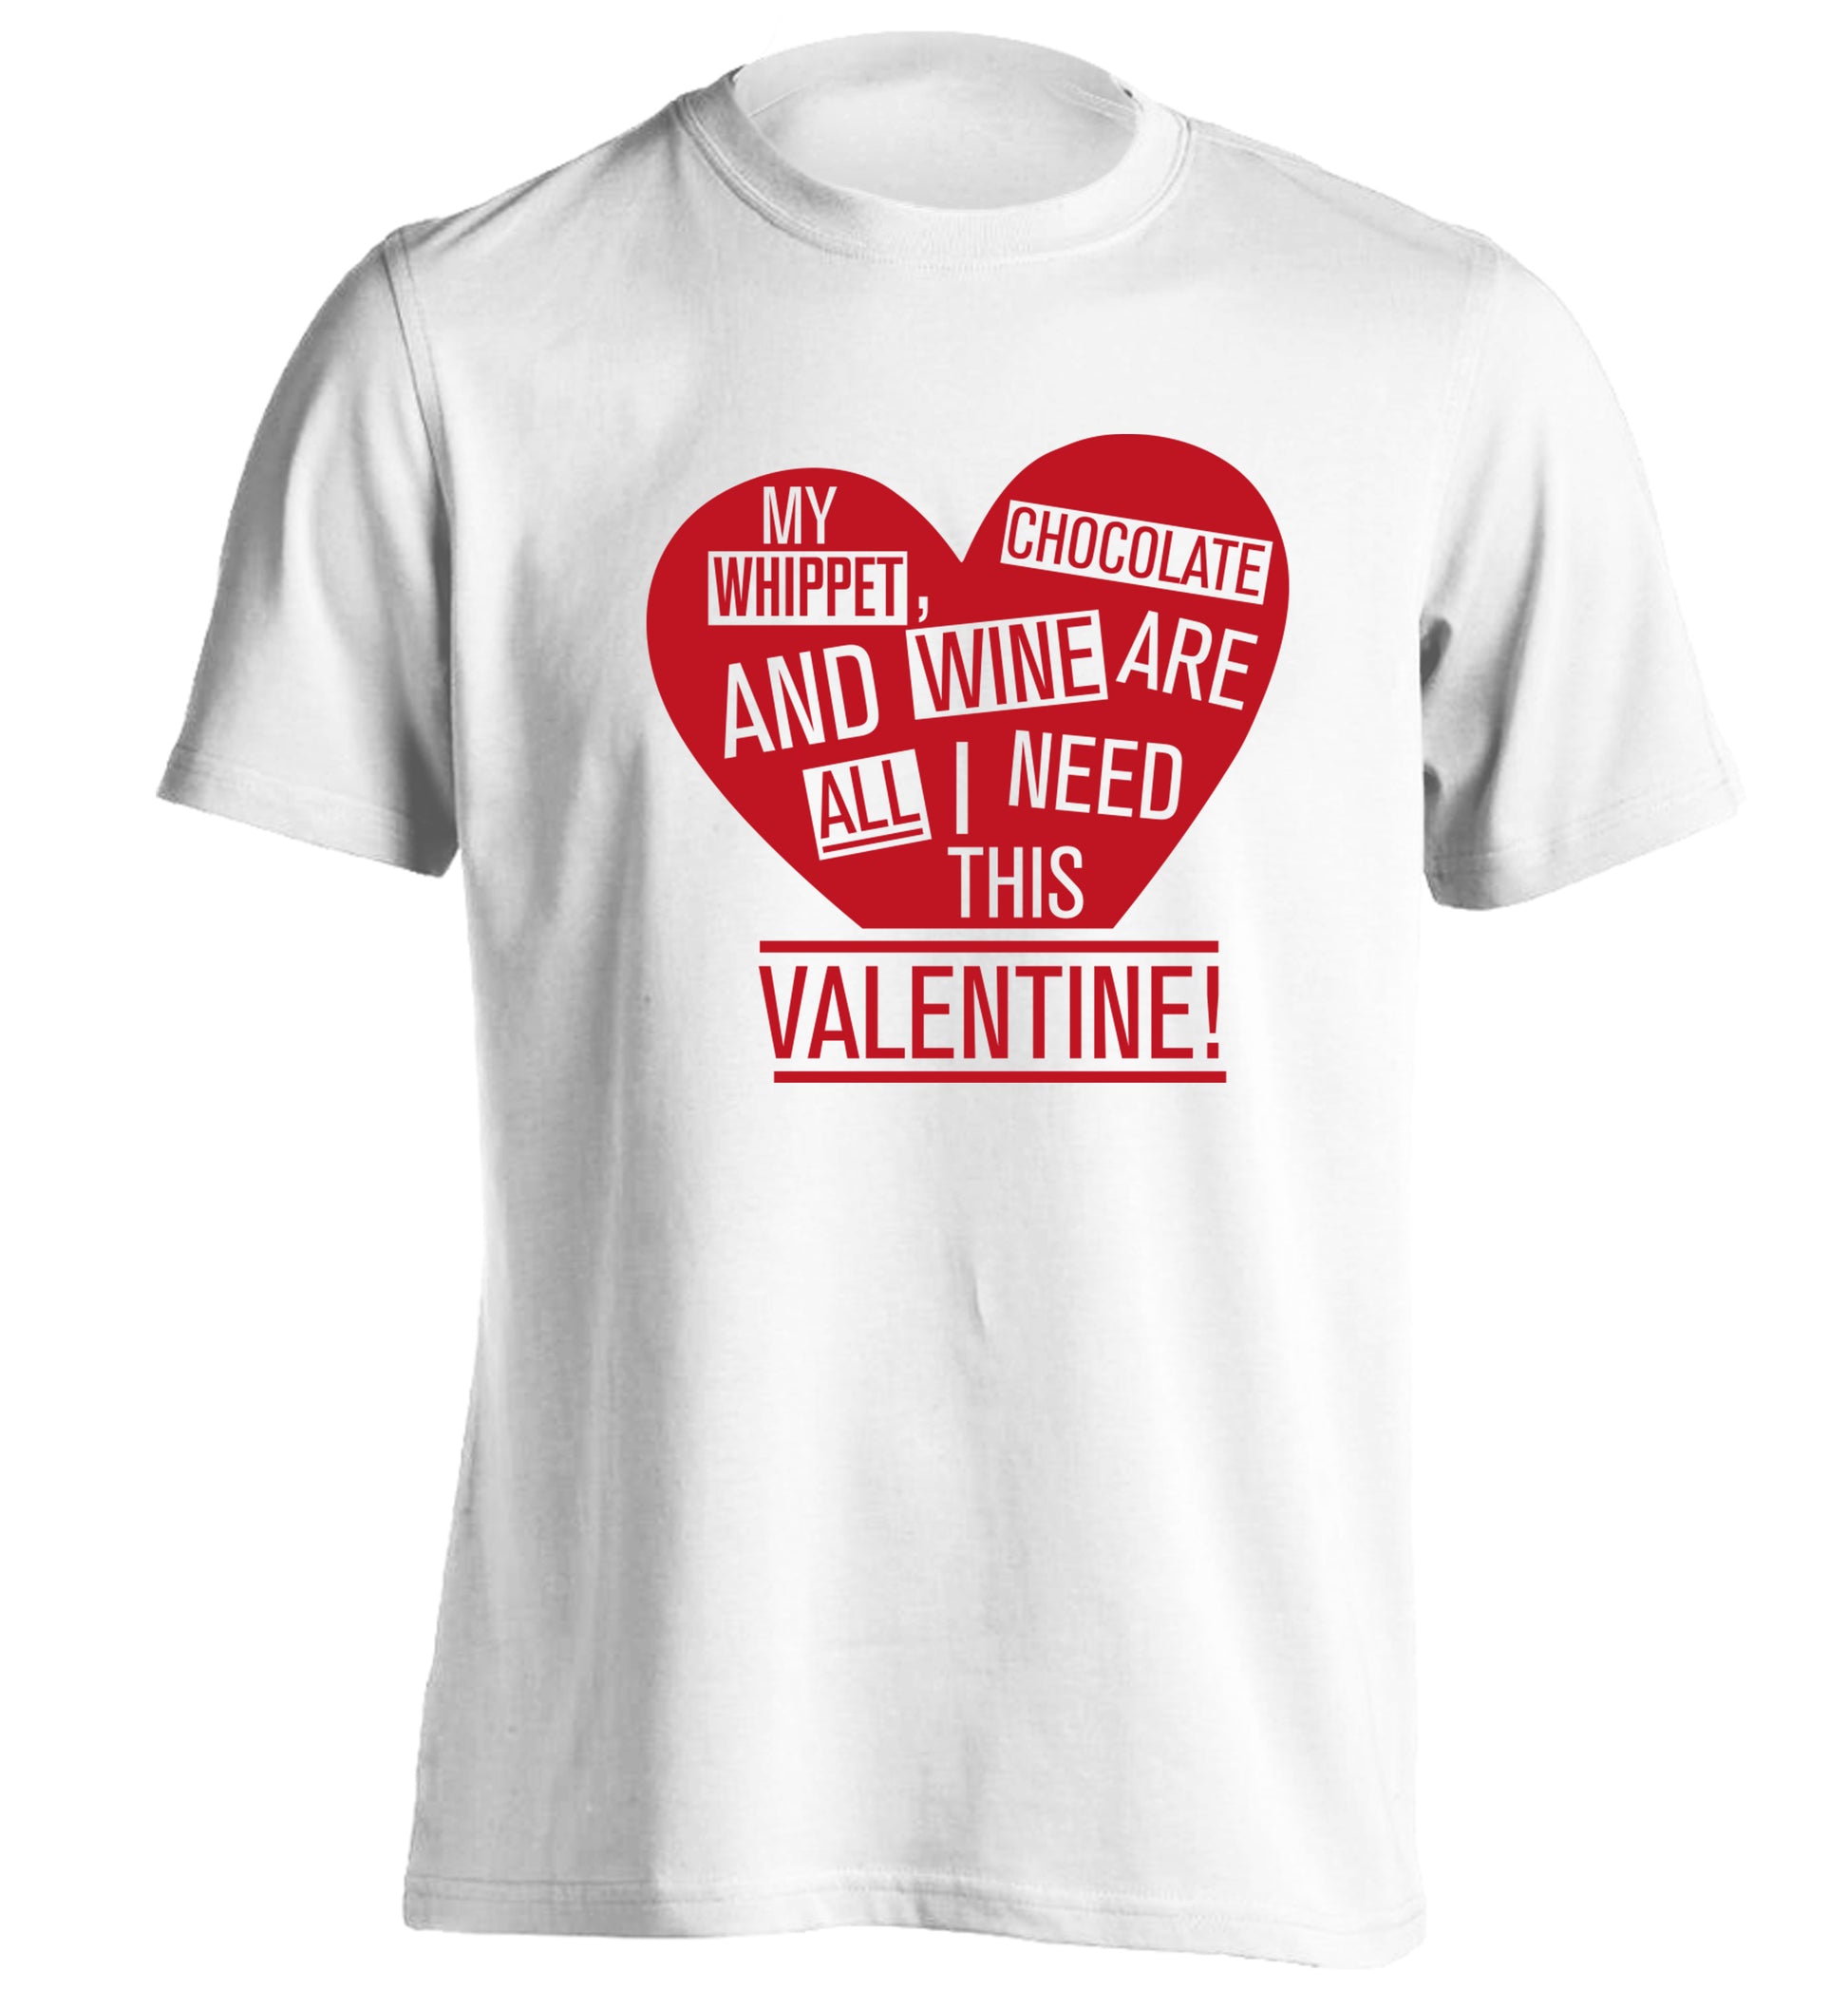 My whippet, chocolate and wine are all I need this valentine! adults unisex white Tshirt 2XL